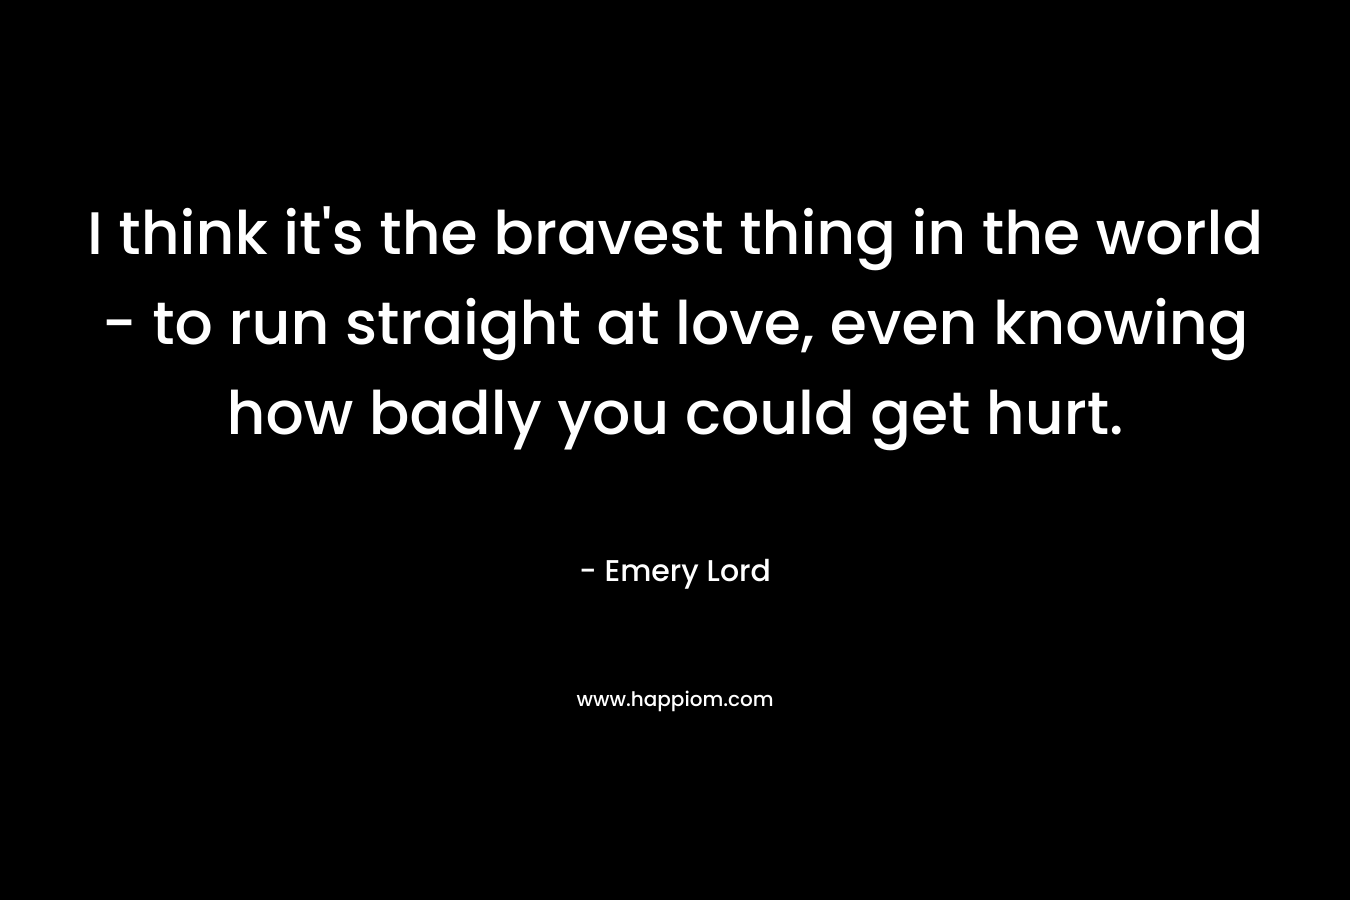 I think it's the bravest thing in the world - to run straight at love, even knowing how badly you could get hurt.